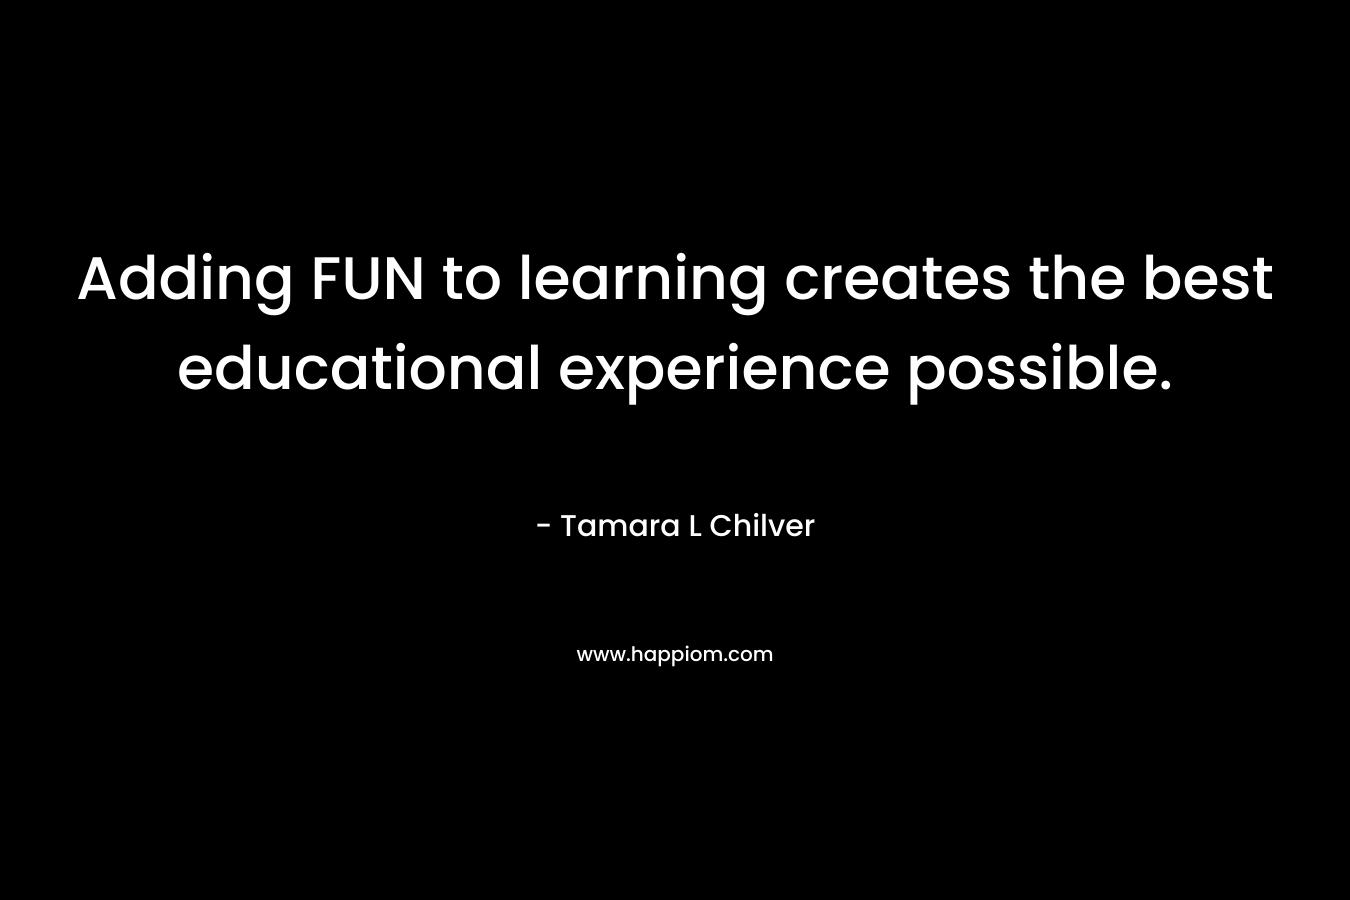 Adding FUN to learning creates the best educational experience possible.